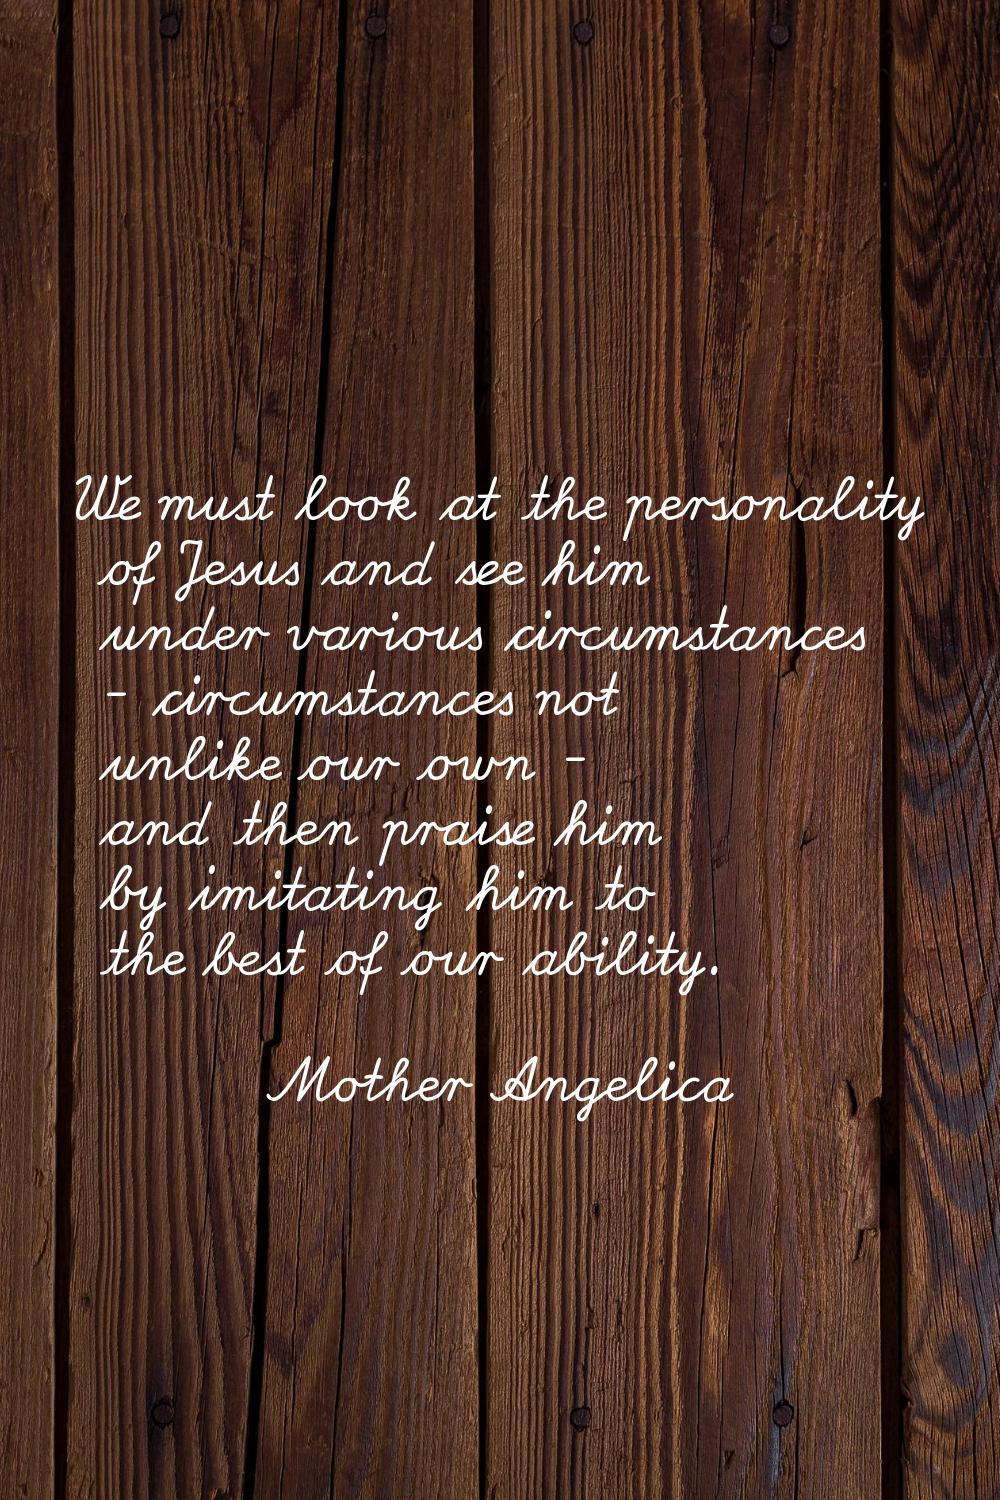 We must look at the personality of Jesus and see him under various circumstances - circumstances no